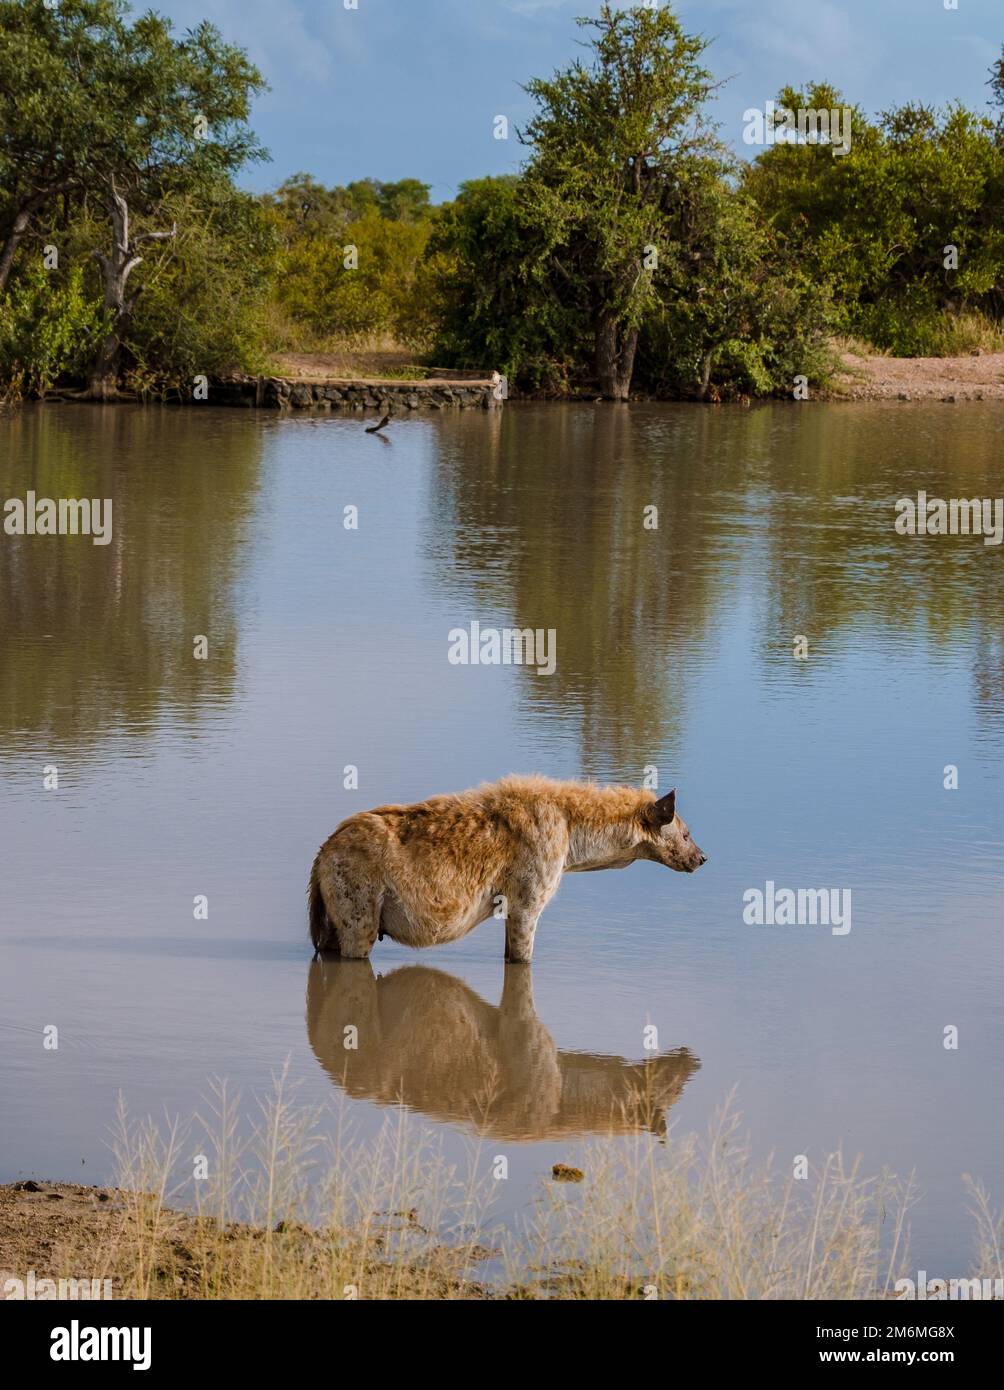 Pregnant Hyena in water lake with reflection at Kruger National park South Africa Stock Photo